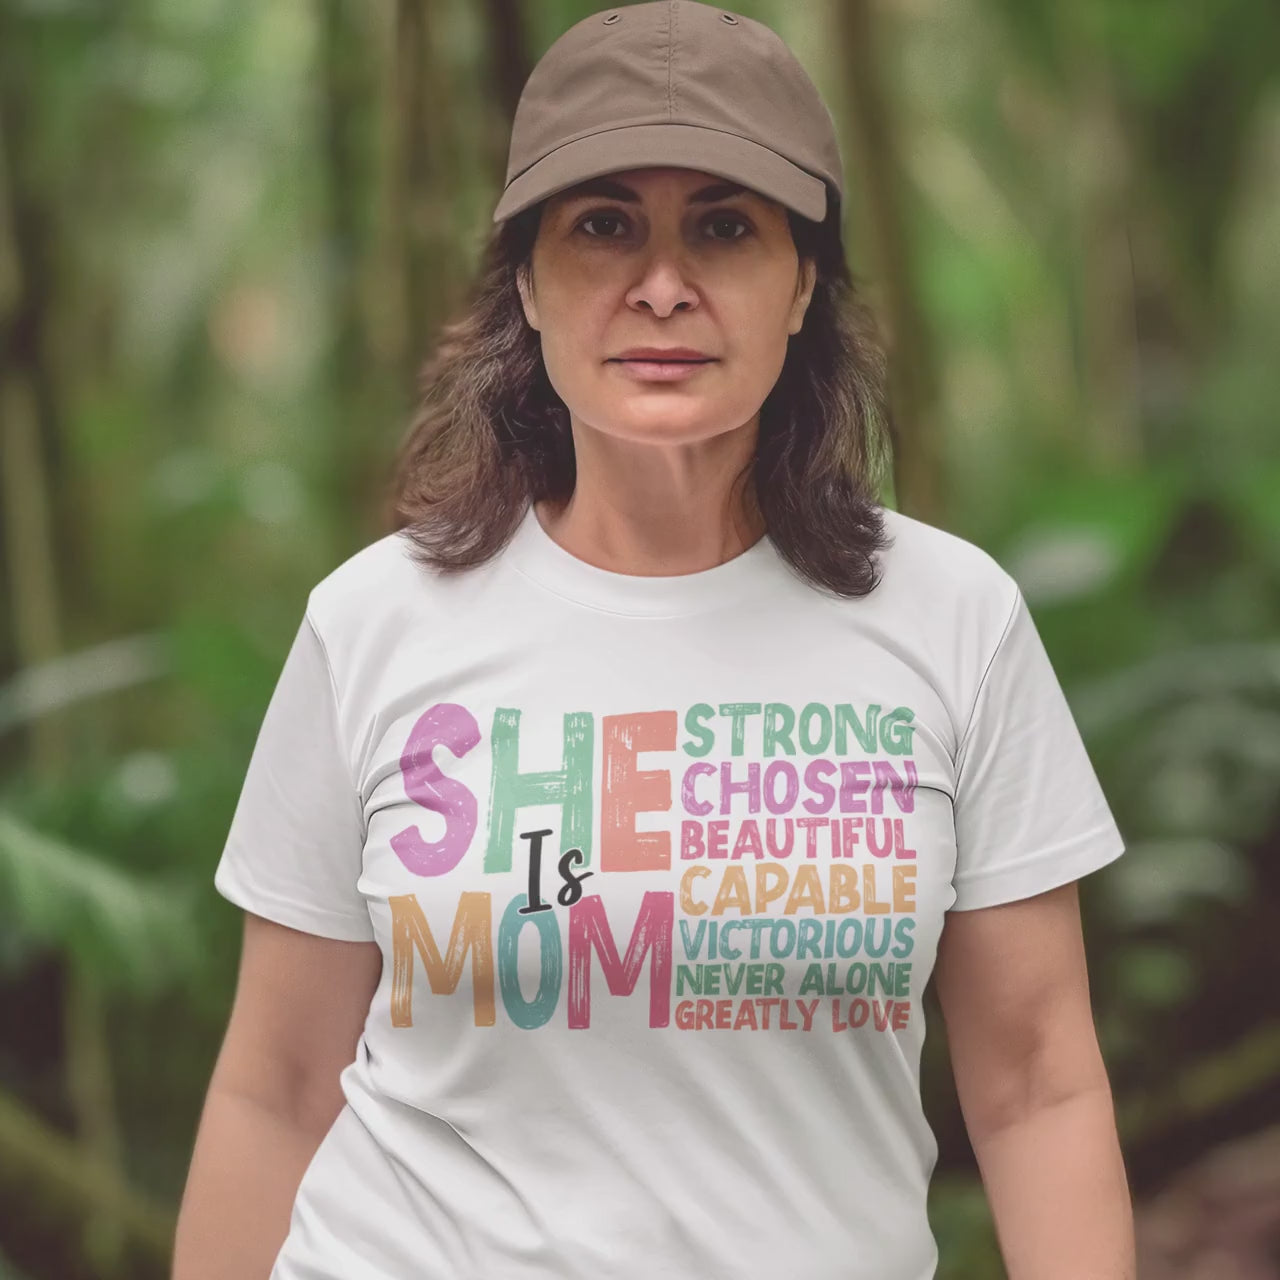 She is Mom shirt, Mothers Day shirt, Gift for mom, Mothers Day gift shirt, Mom shirt, Mothers Day, Trendy shirt,Mom gift shirt, gift for her